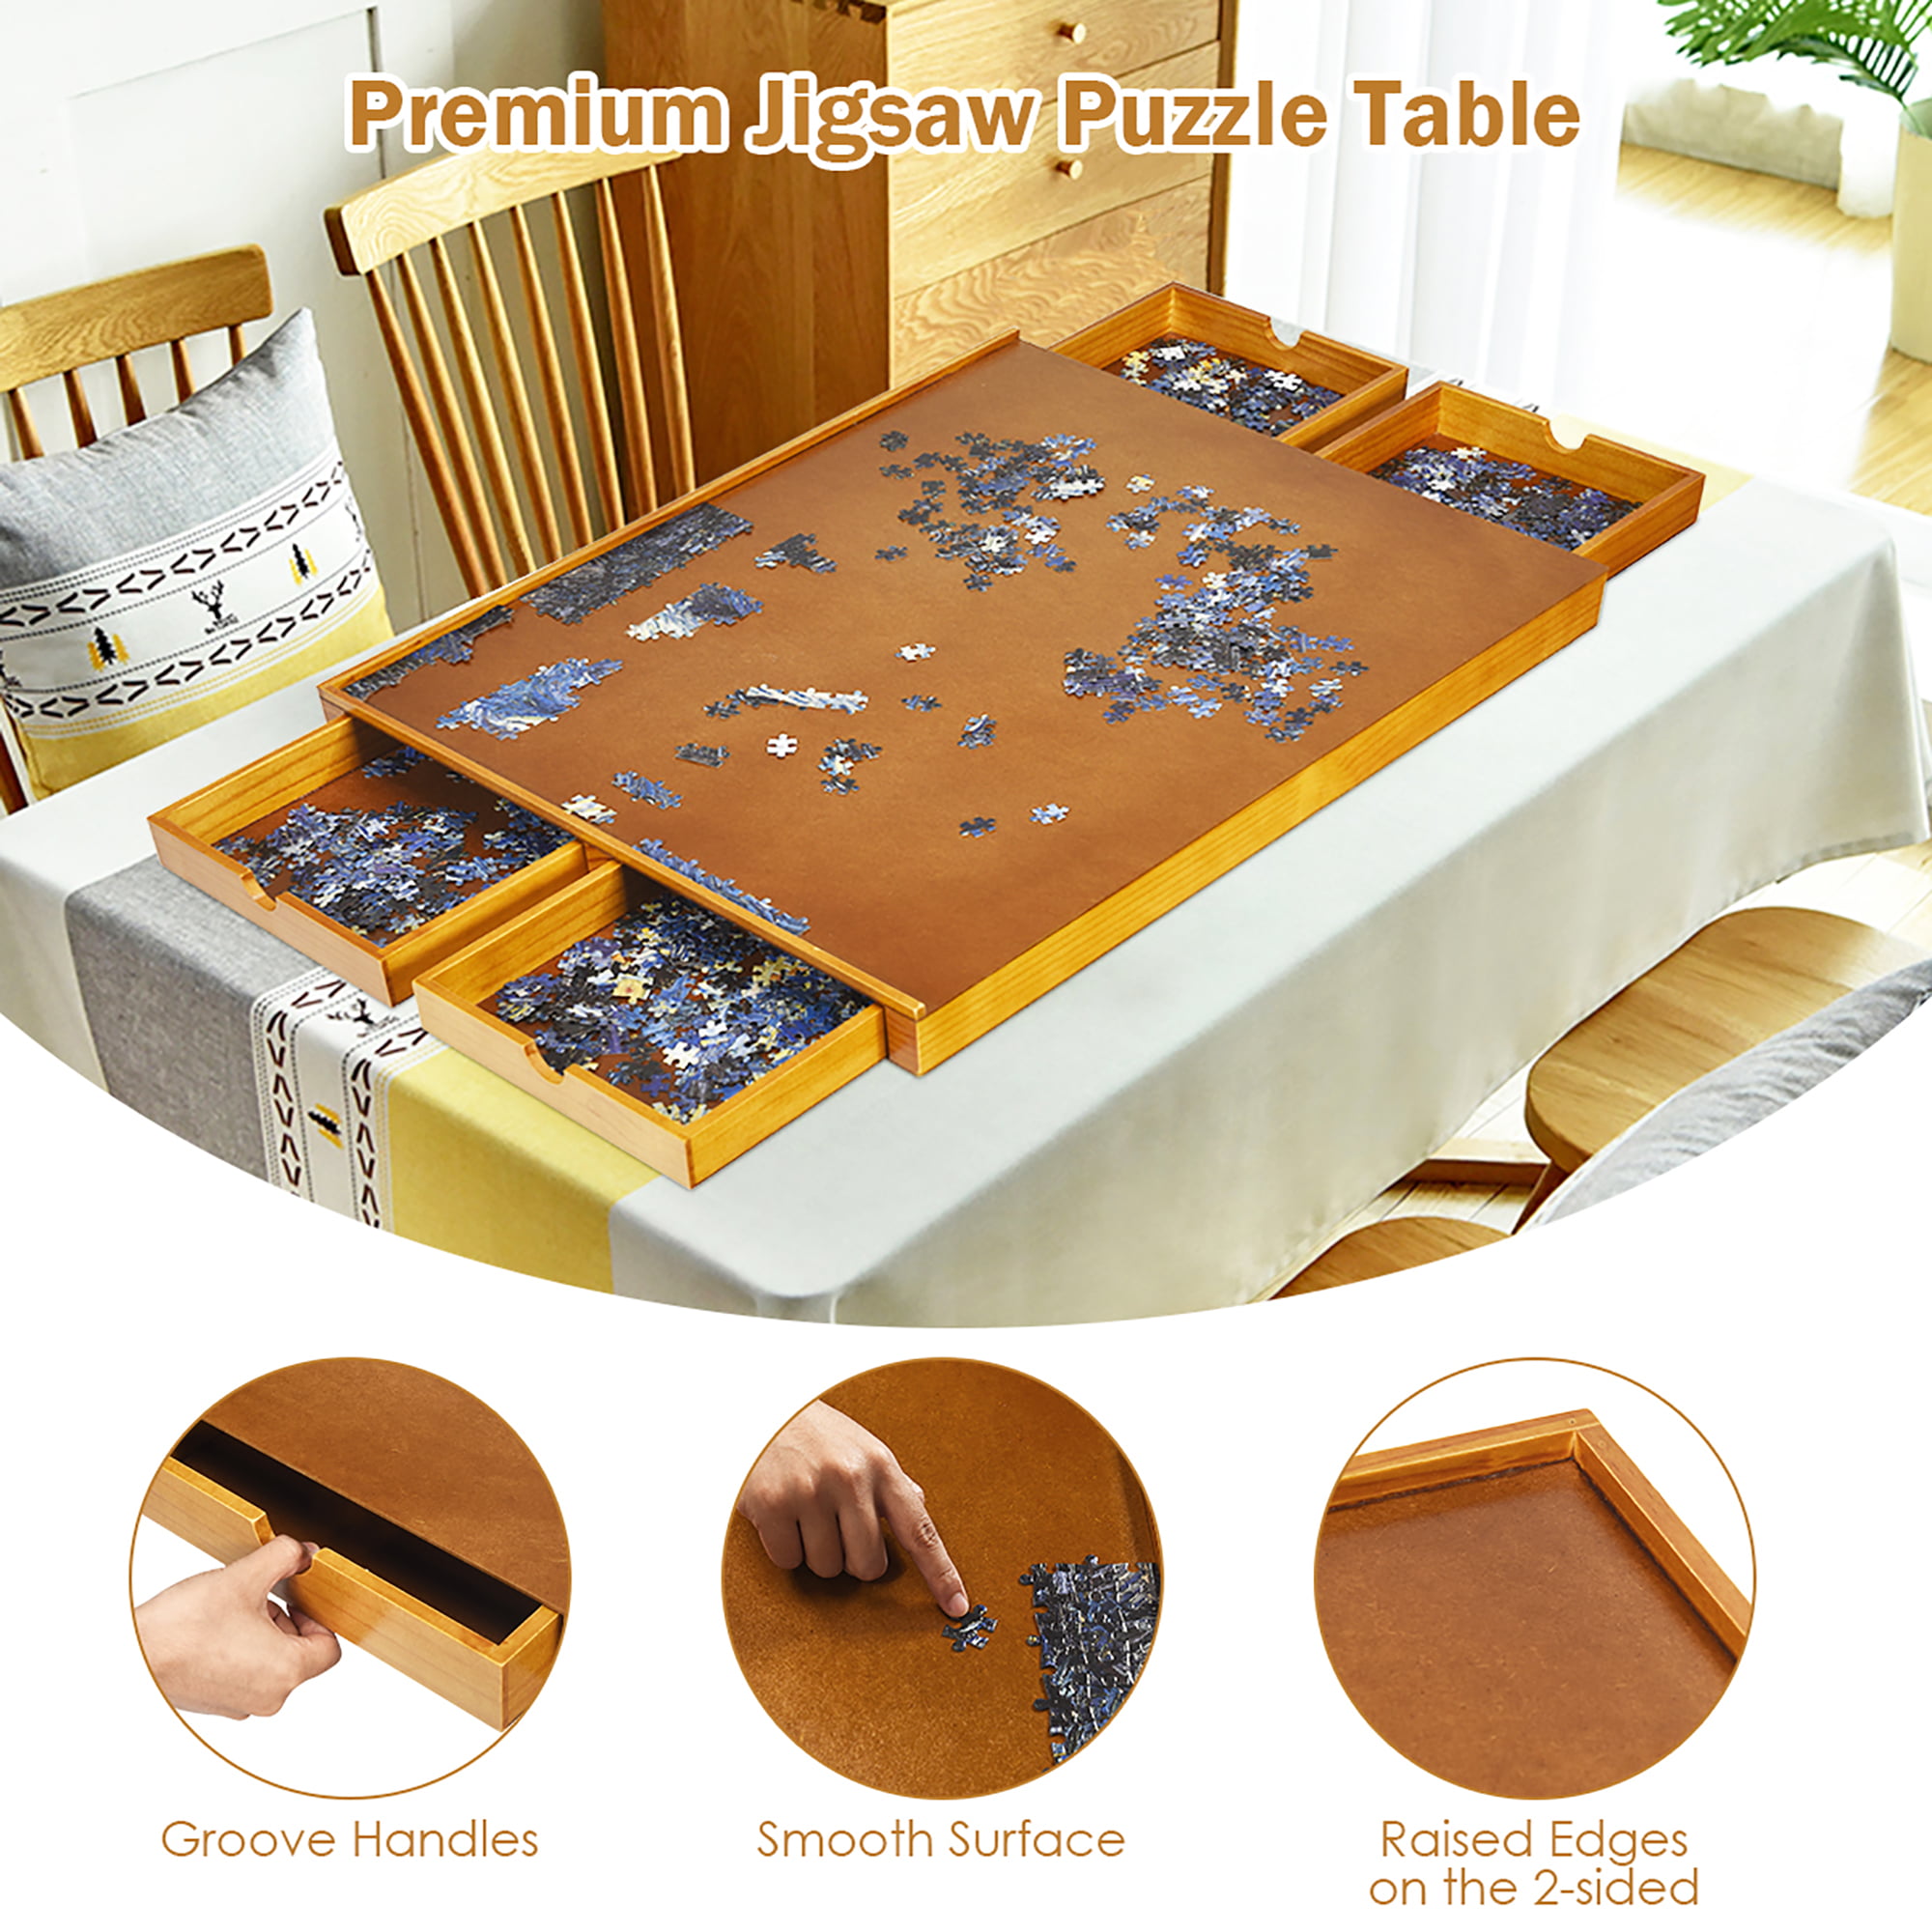 ATDAWN 1500 Pieces Upgraded Wooden Jigsaw Puzzle Table, Jigsaw Puzzle  Board, Puzzle Plateau-Smooth Fiberboard Work Surface, with Five Drawers,  Puzzle